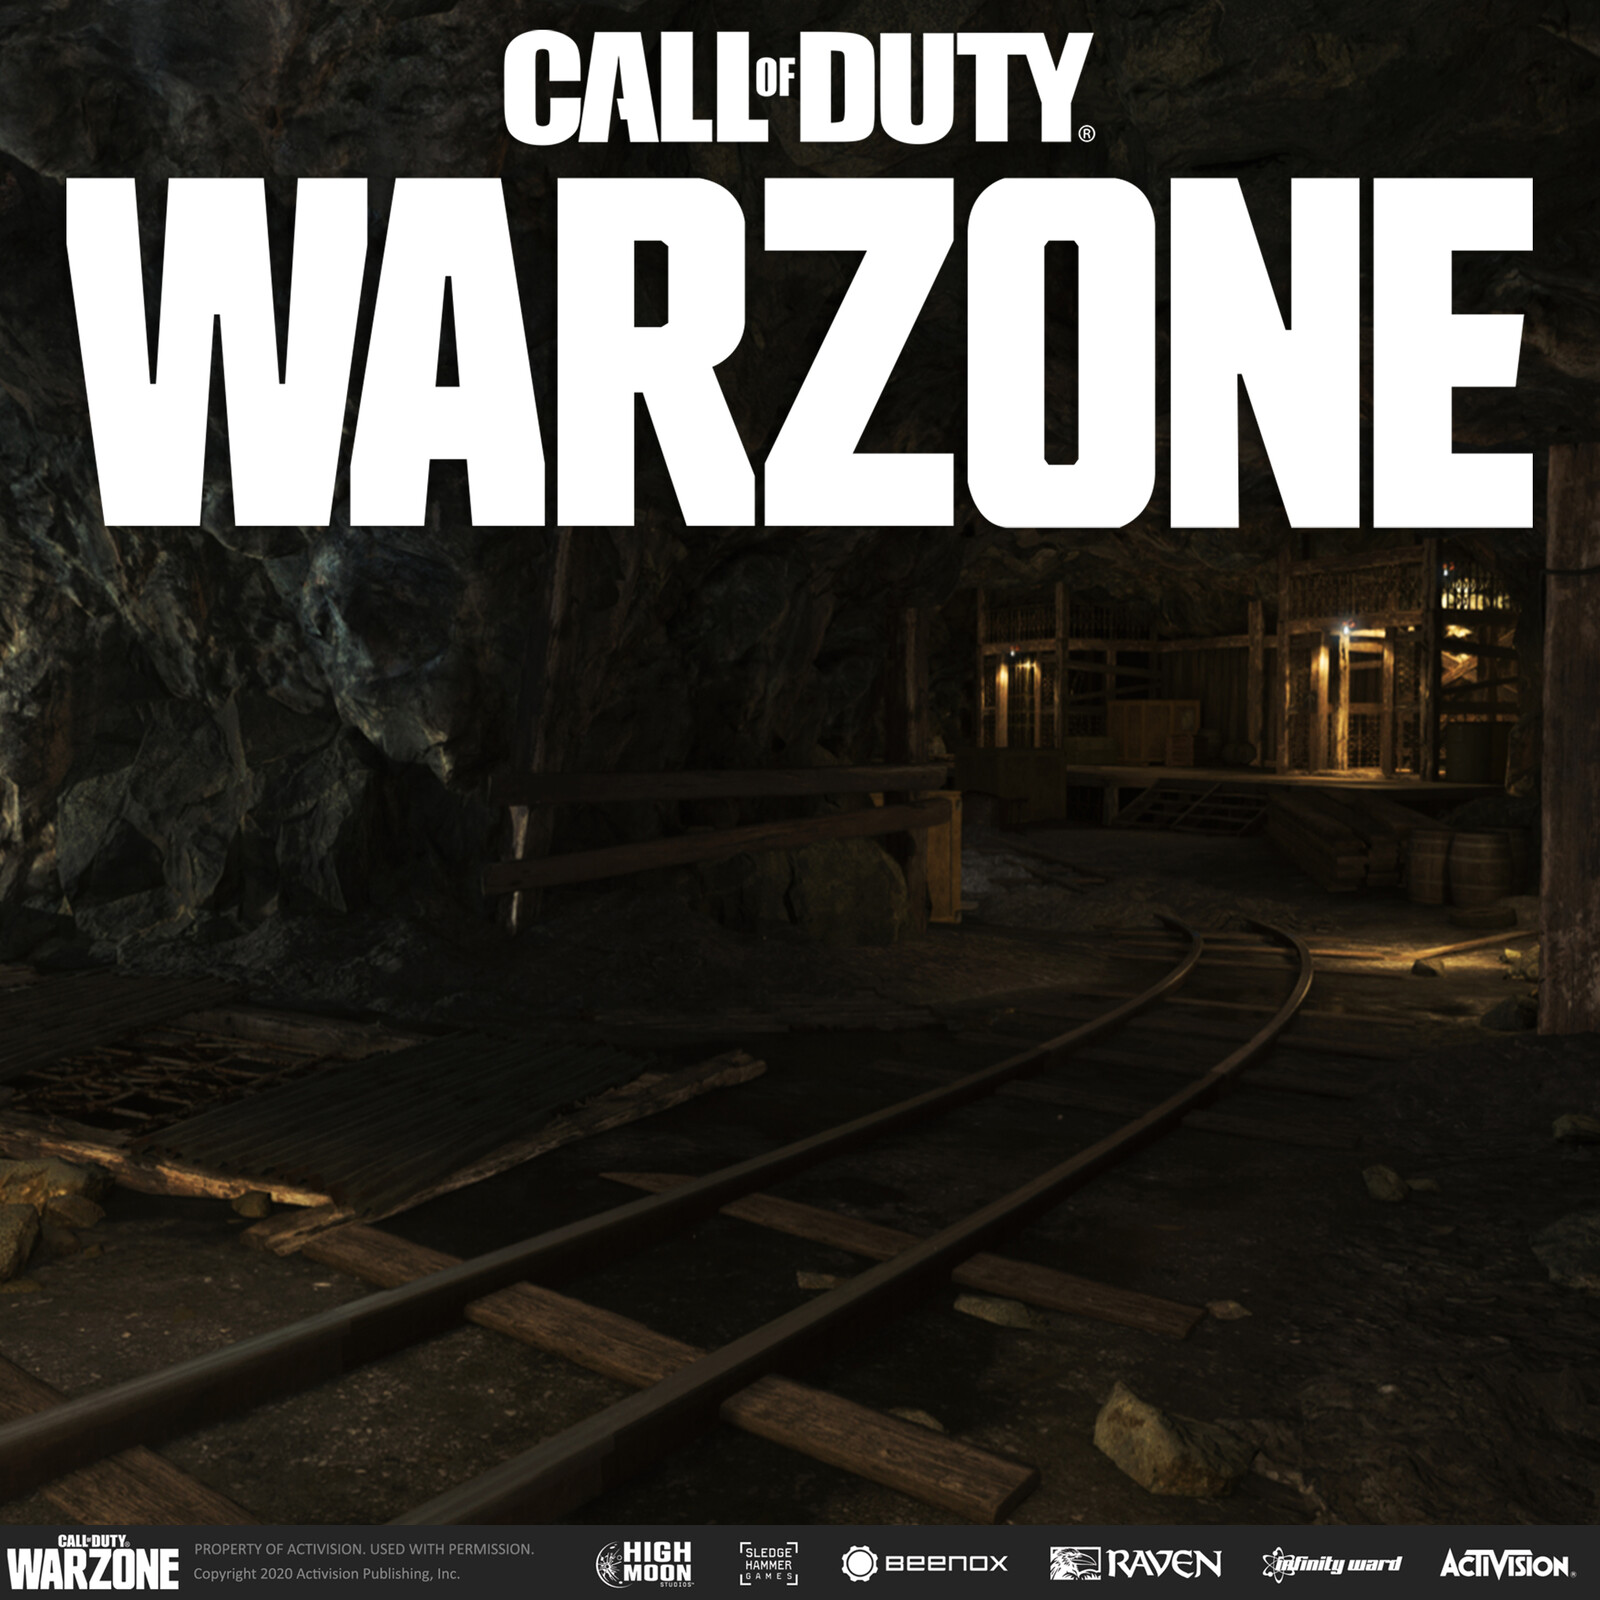 Call Of Duty: Vanguard Warzone - Mines, Tunnels - 1